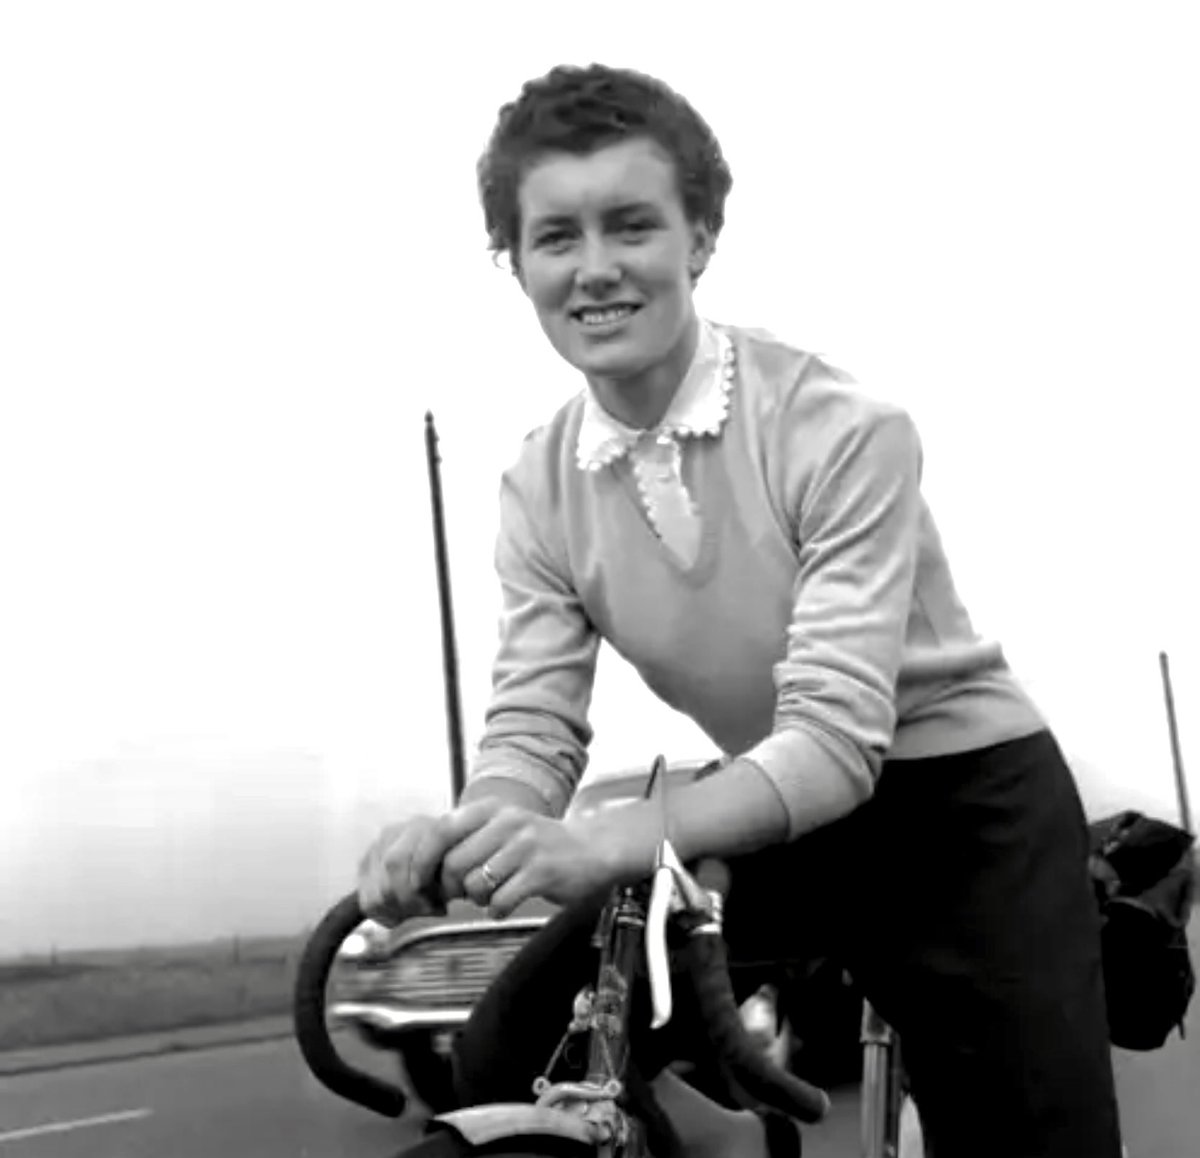 Beryl enjoying some downtime with the saddlebag on and a touring trip during the early 1960s.